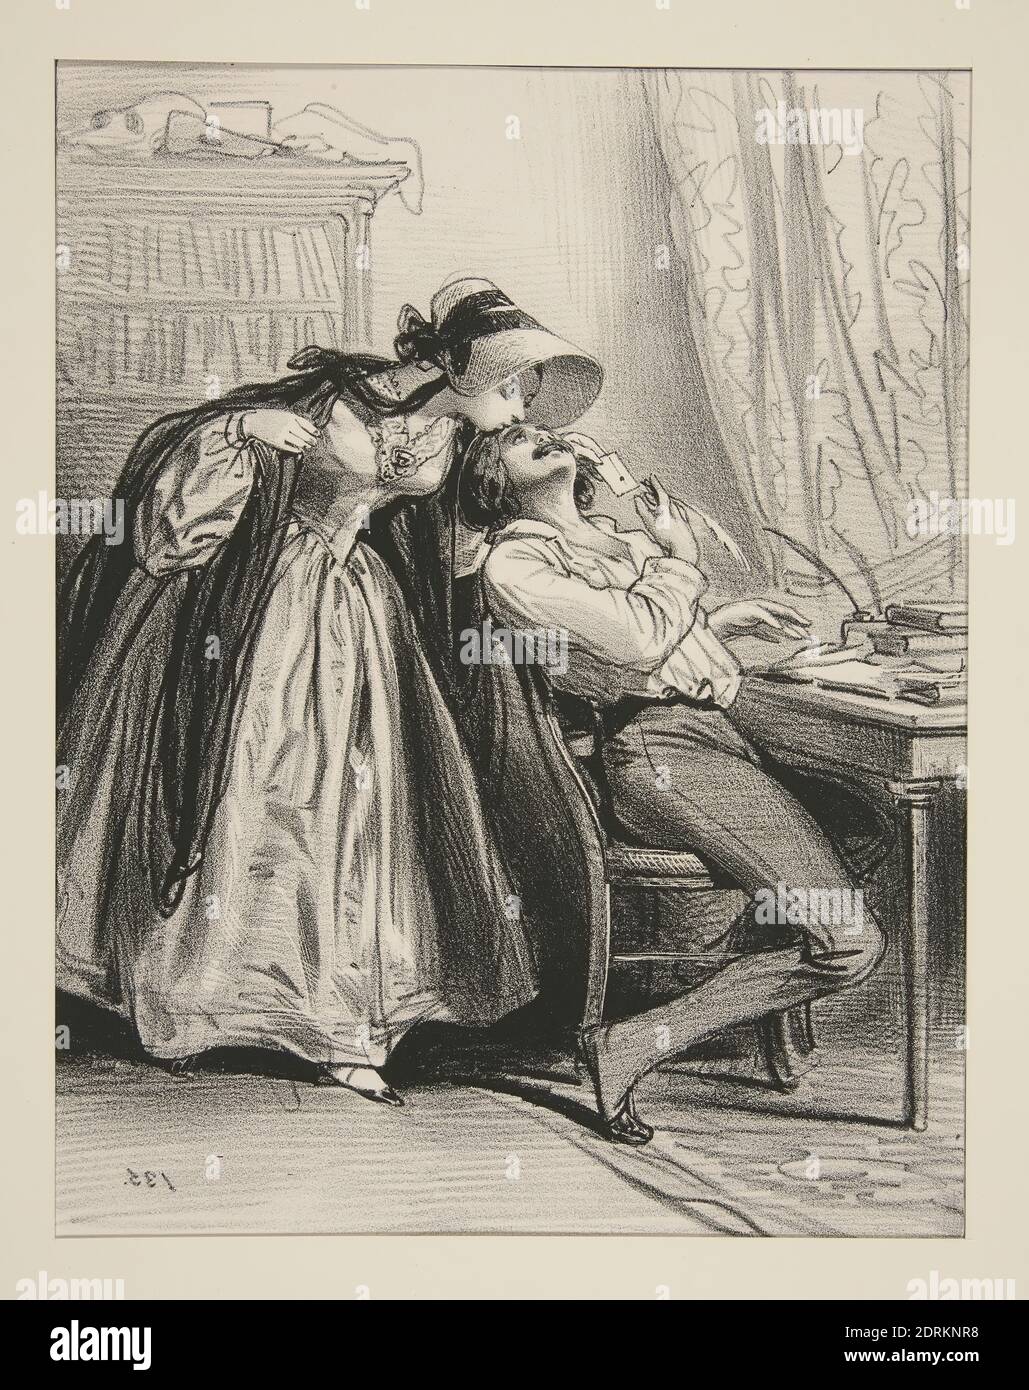 Artist: Paul Gavarni, French, 1804–1866, Ton concierge m’a remit ce billet…, Lithograph, French, 19th century, Works on Paper - Prints Stock Photo